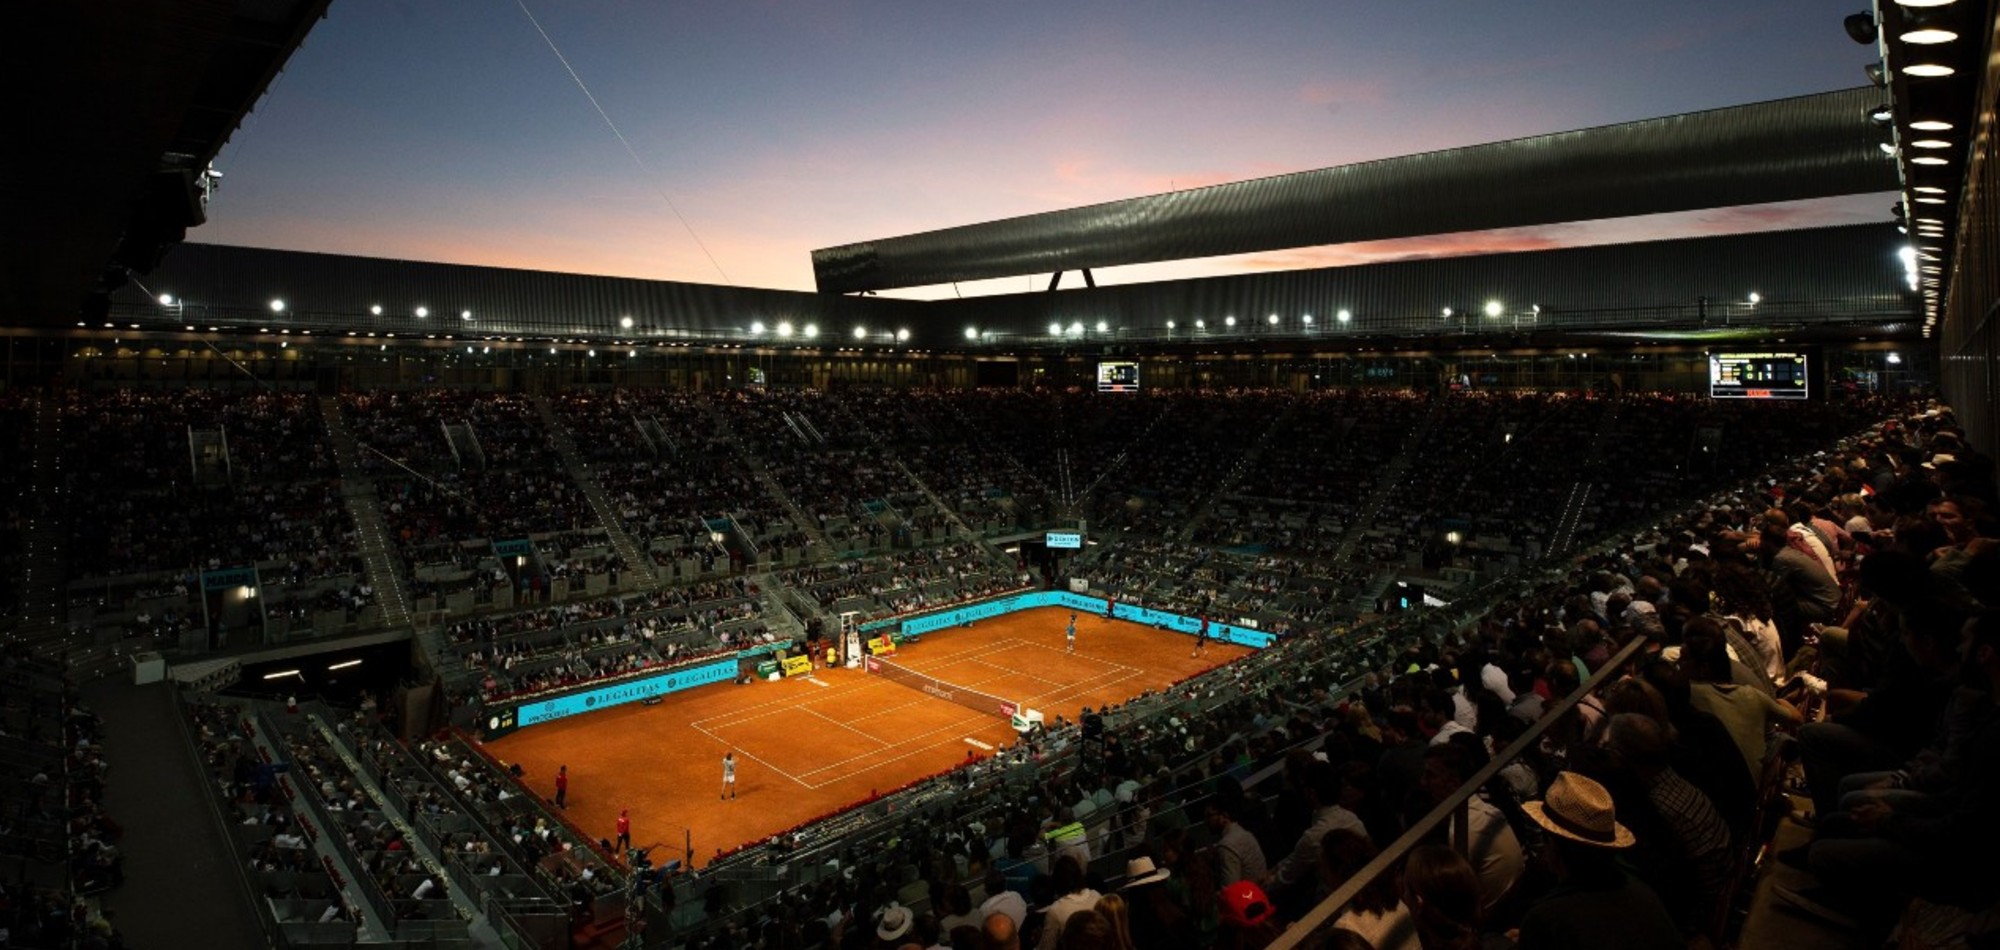 Tennis: Organisers told not to hold Madrid Open amid surge in COVID-19 cases